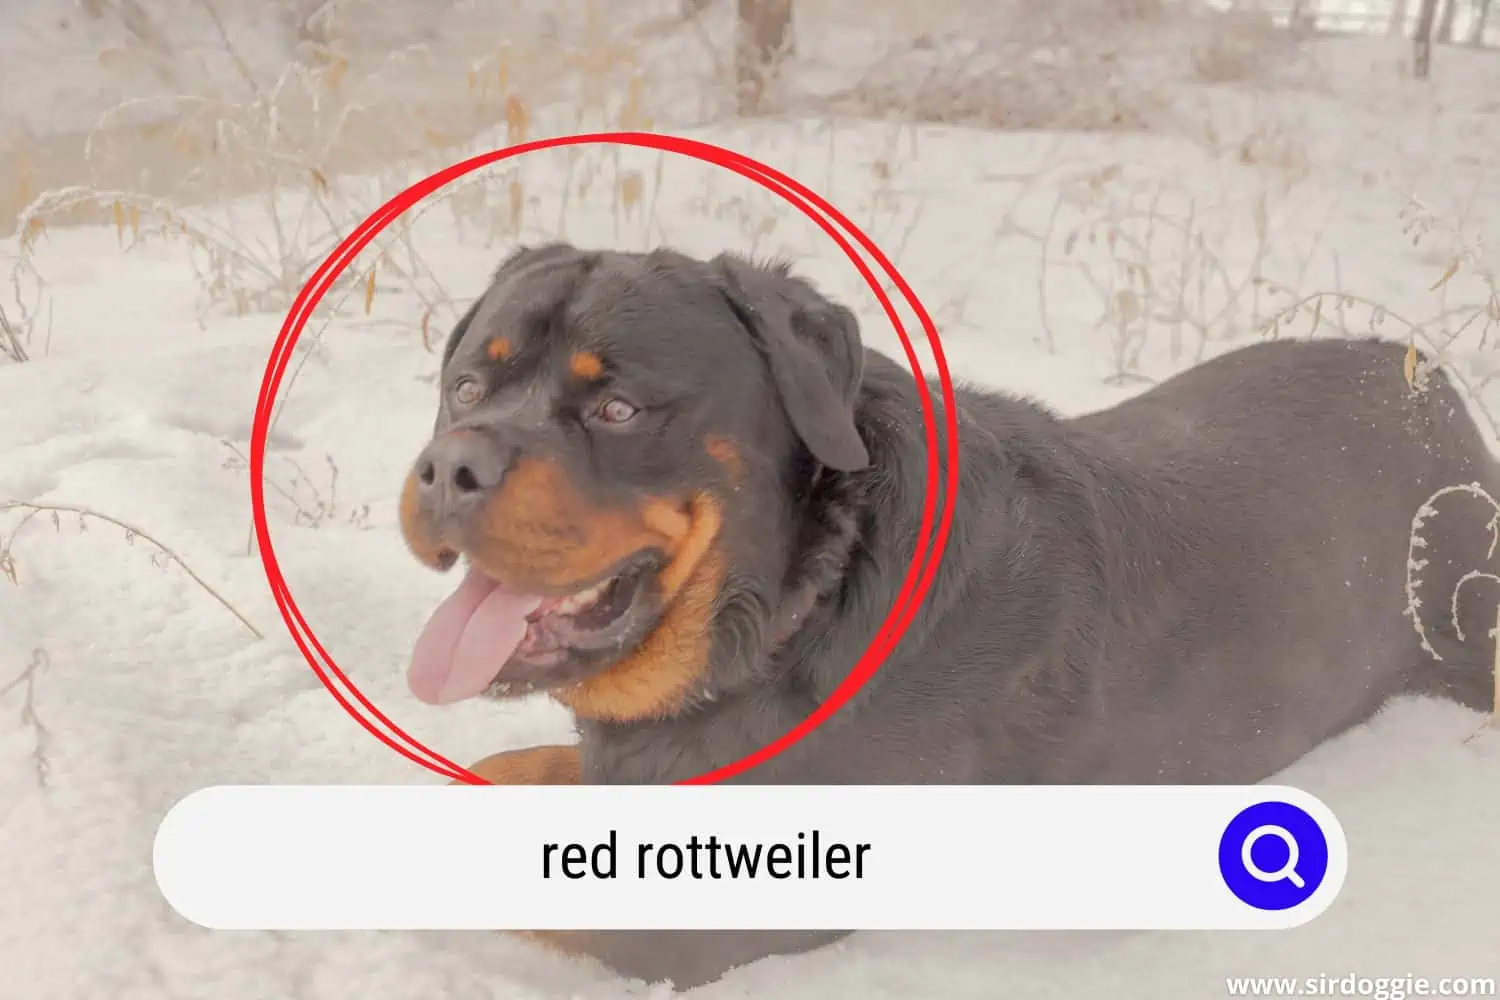 Red Rottweiler lying down in snow